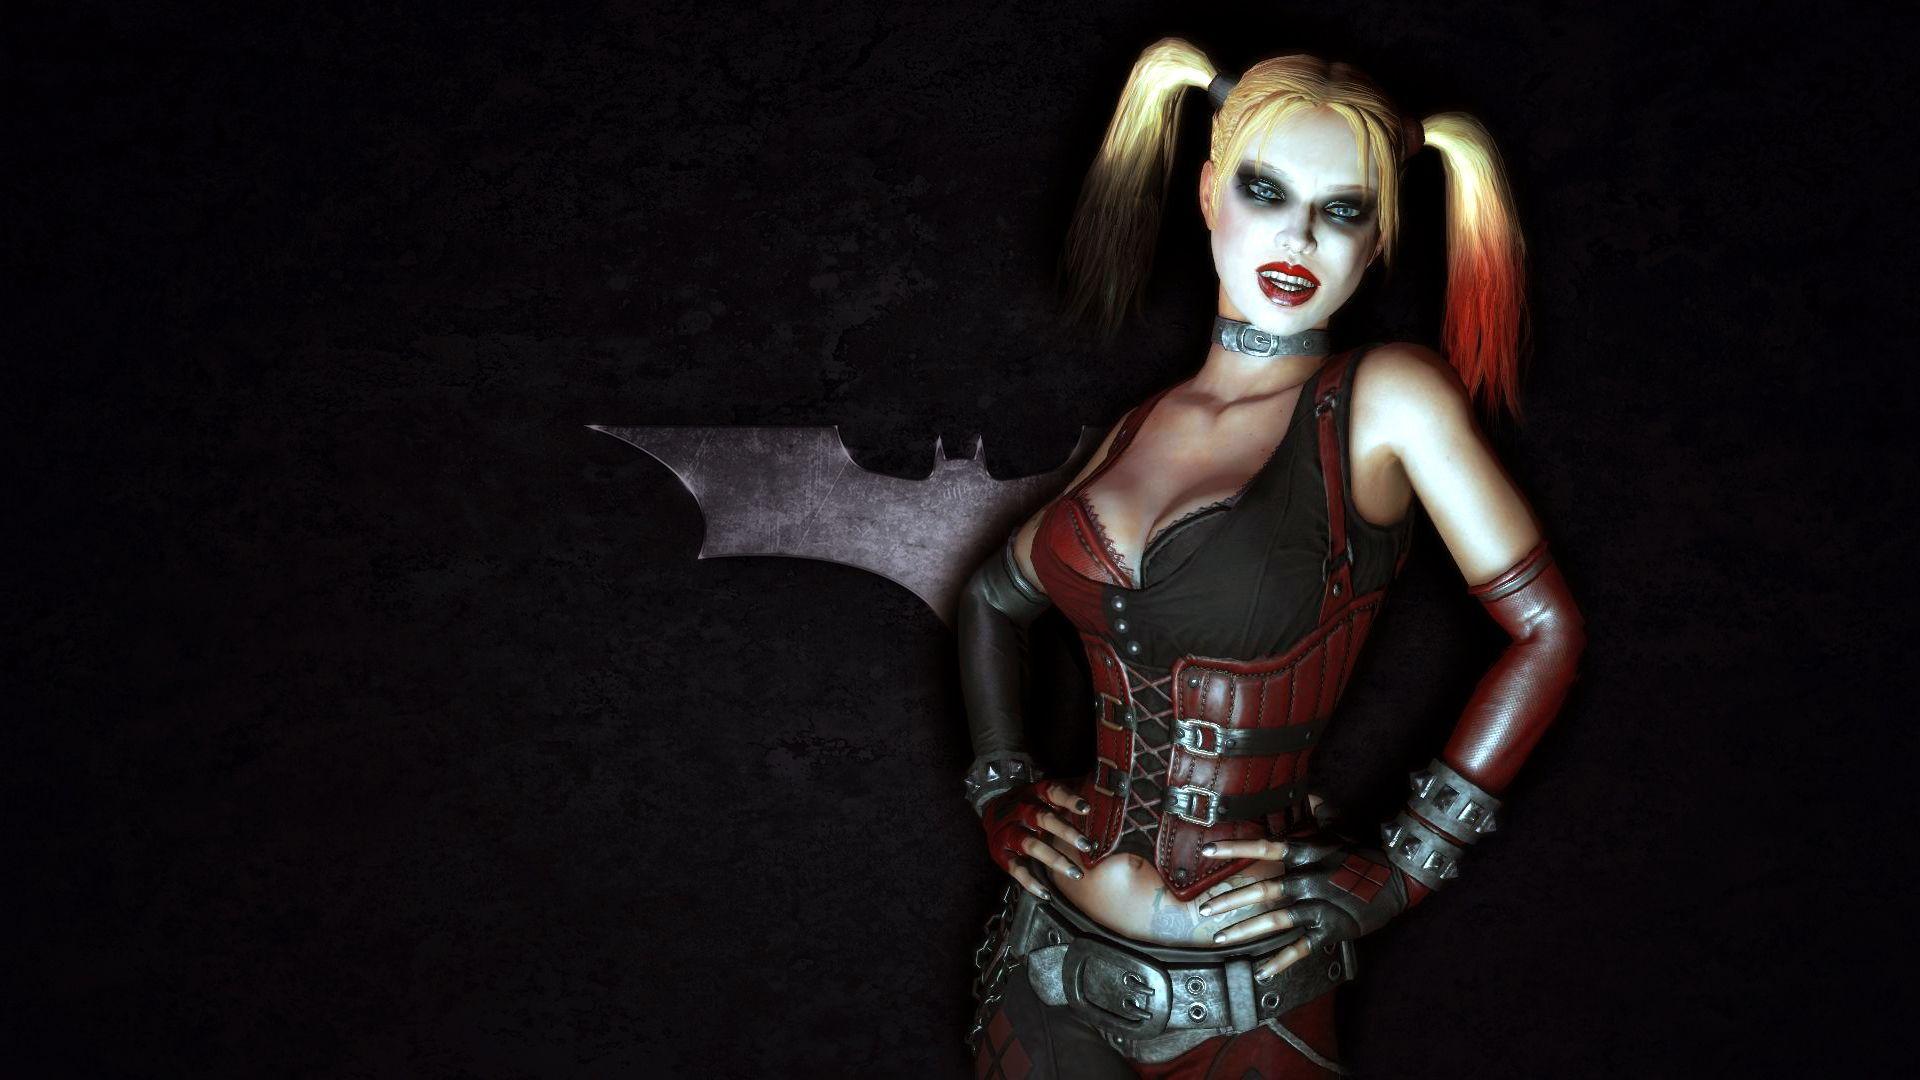 Free Harley Quinn Injustice Wallpaper High Quality Resolution